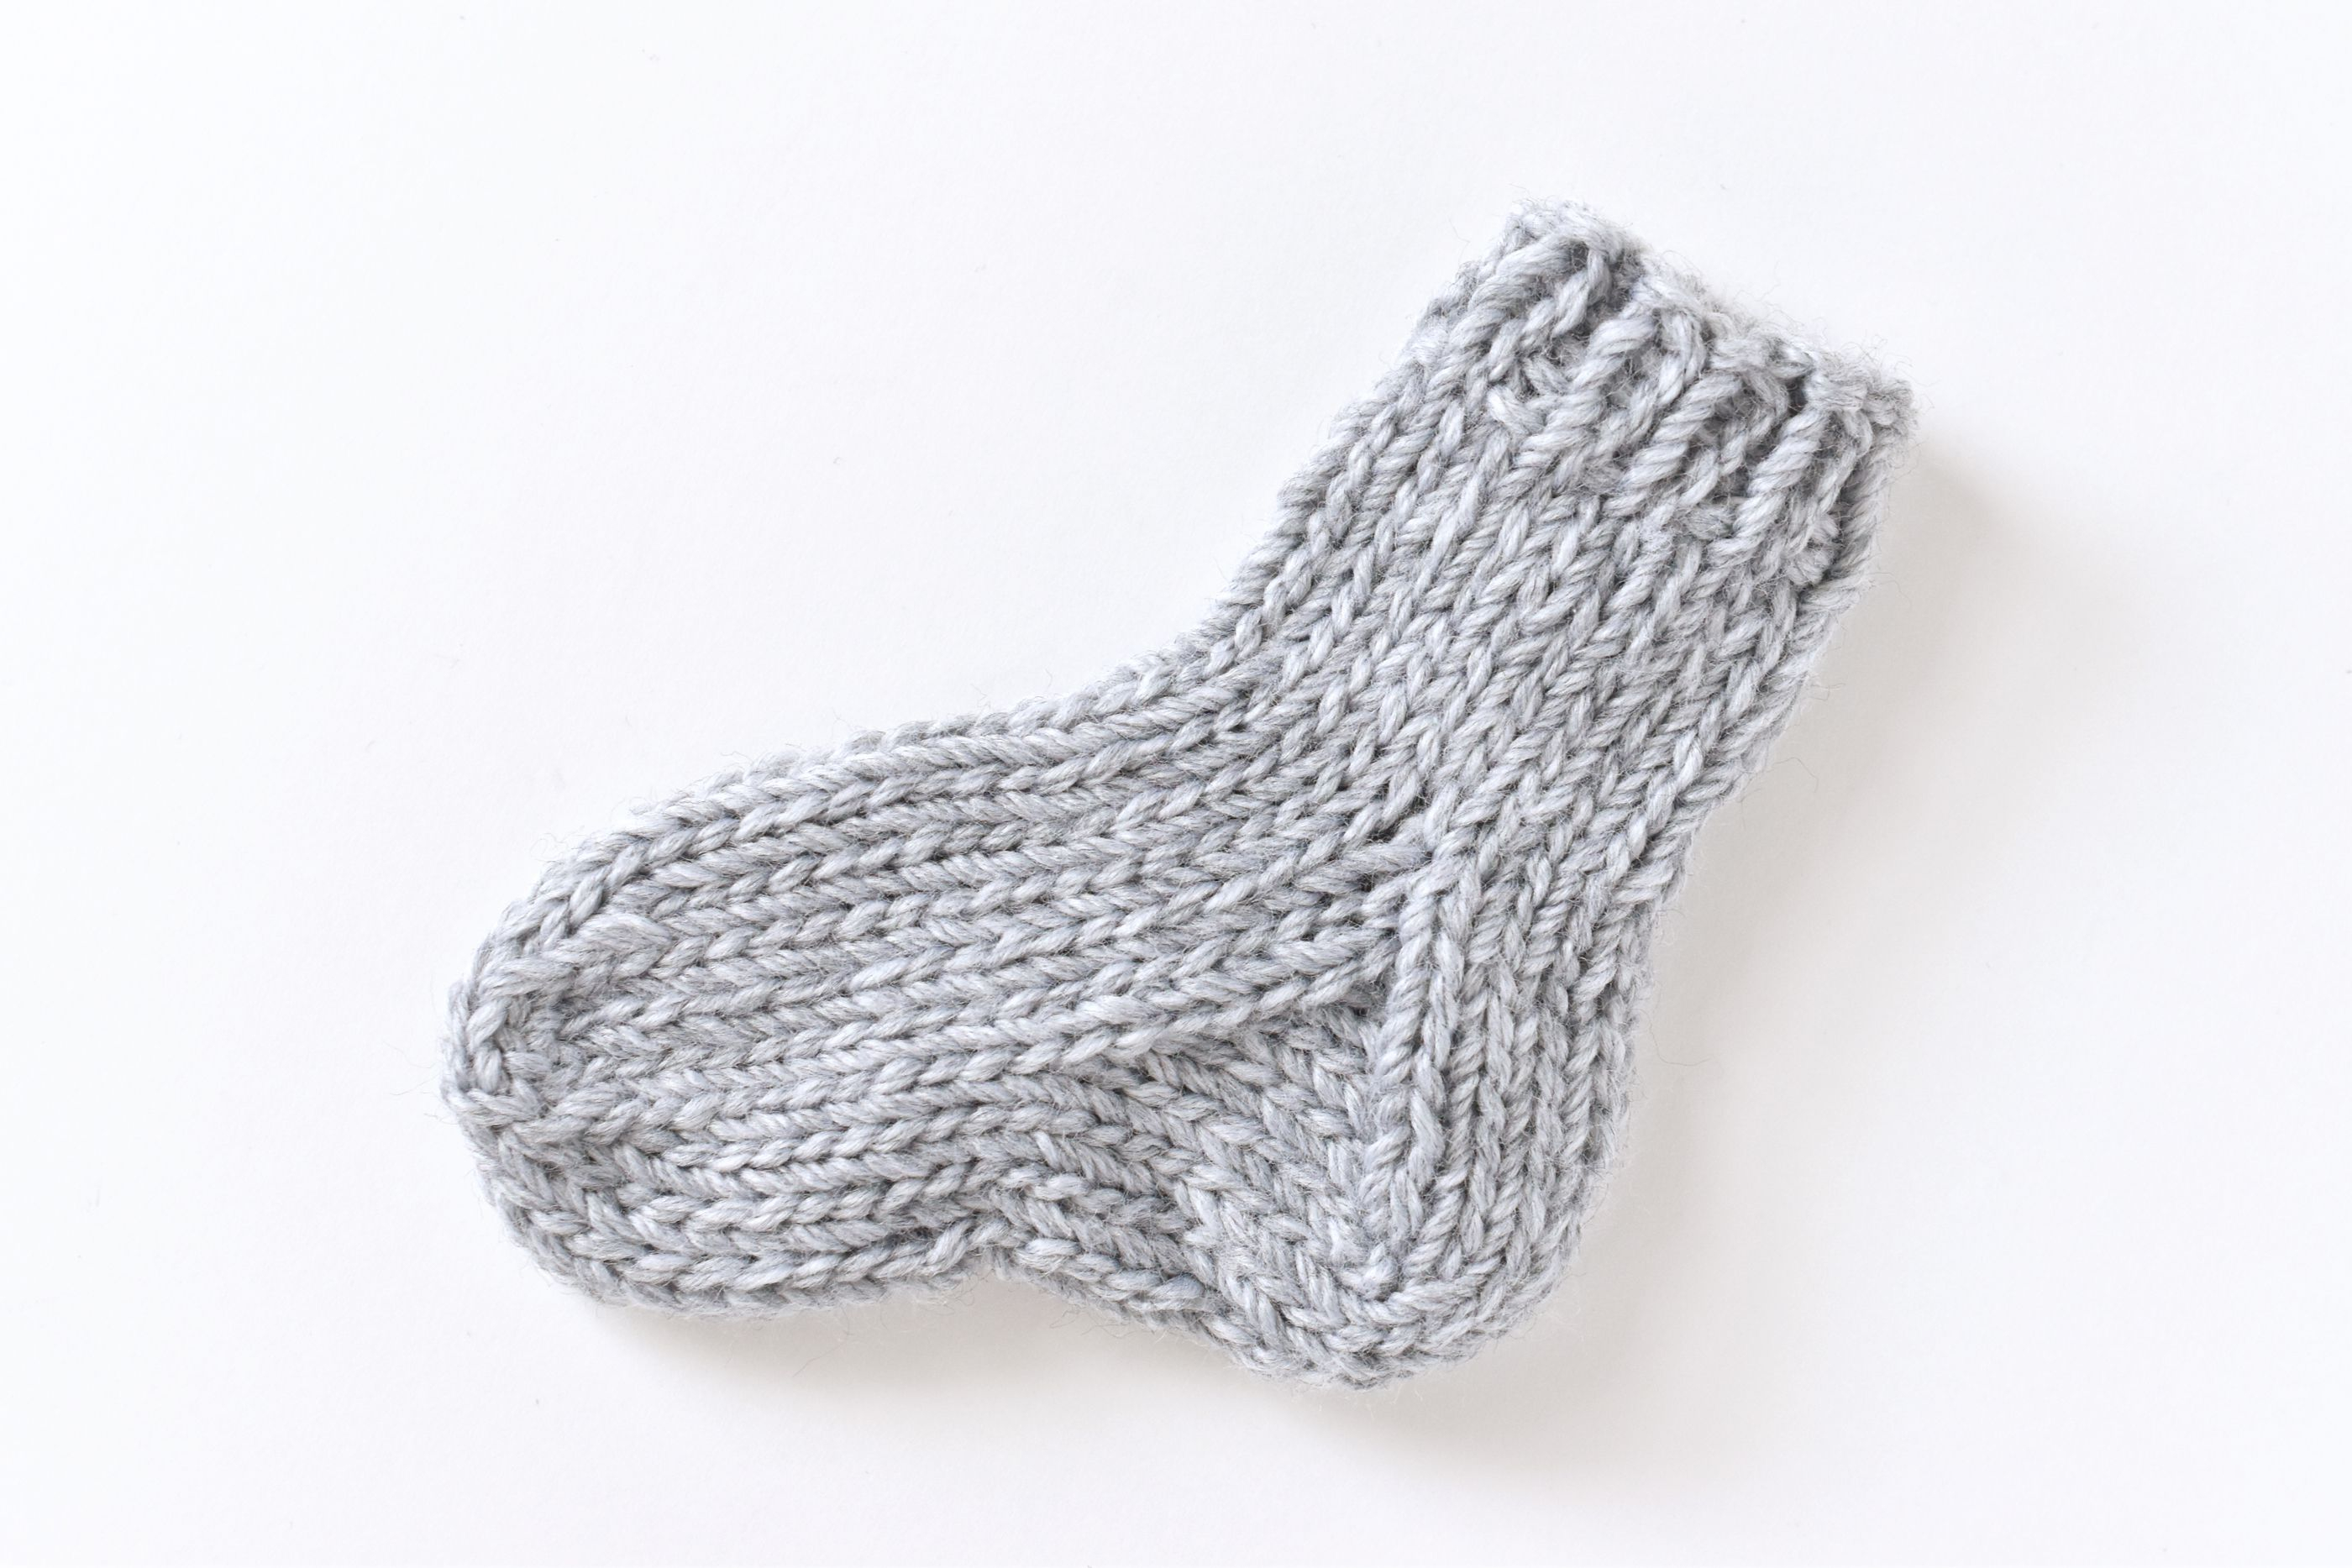 Knitting Socks On Circular Needles Pattern Knit A Small Sock With A Step Step Practice Pattern